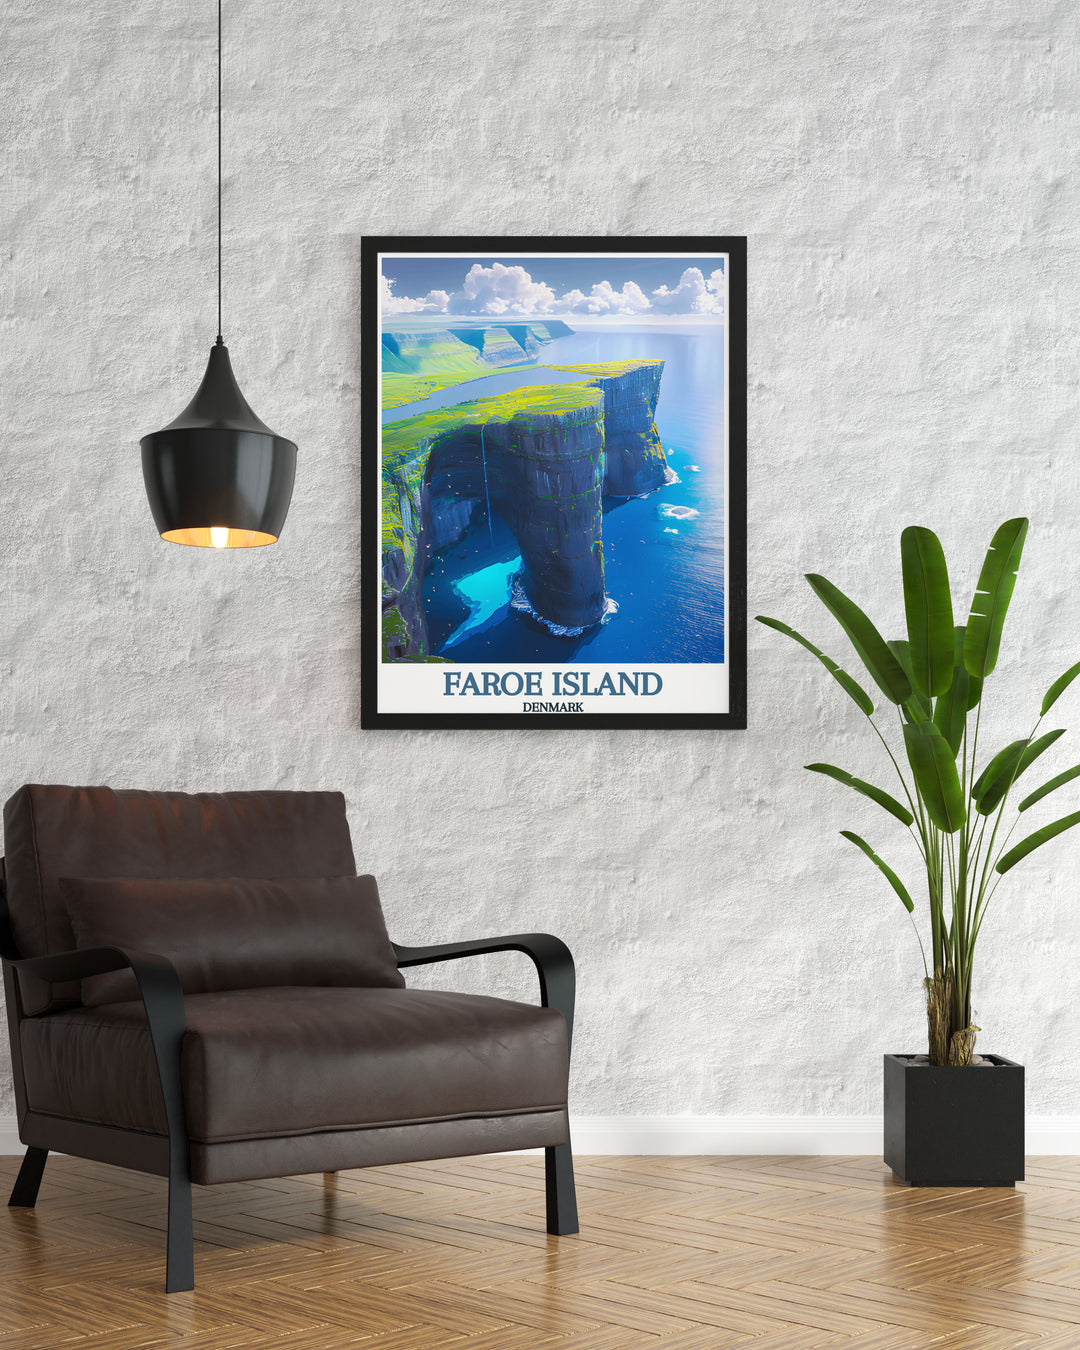 The breathtaking scenery of Sørvágsvatn and the lush landscapes of the Faroe Islands are beautifully illustrated in this poster, celebrating the natural beauty and tranquility of Denmark.